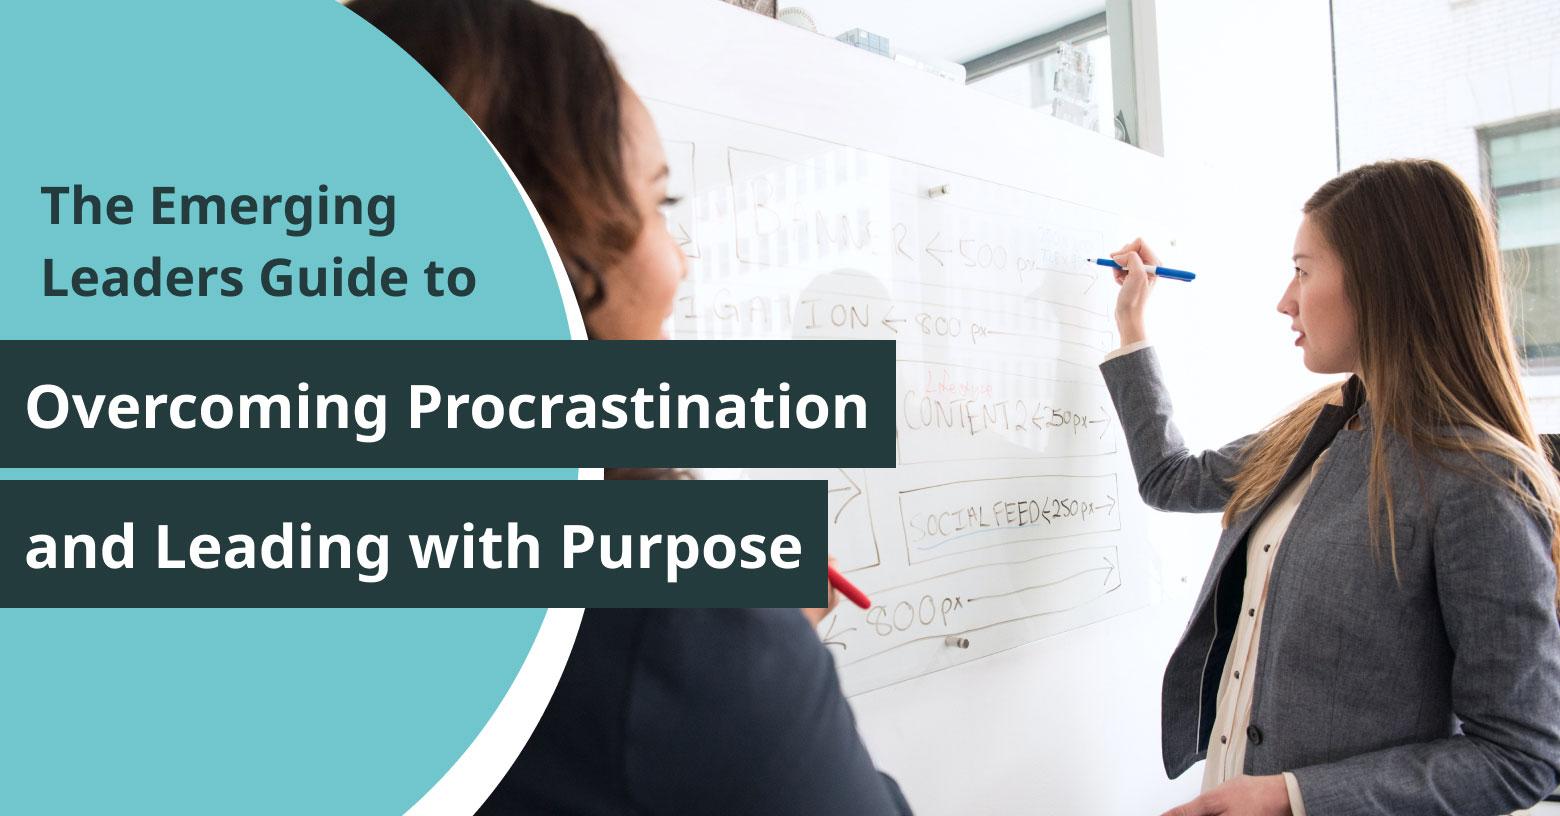 The emerging leader’s guide to overcoming procrastination and leading with purpose